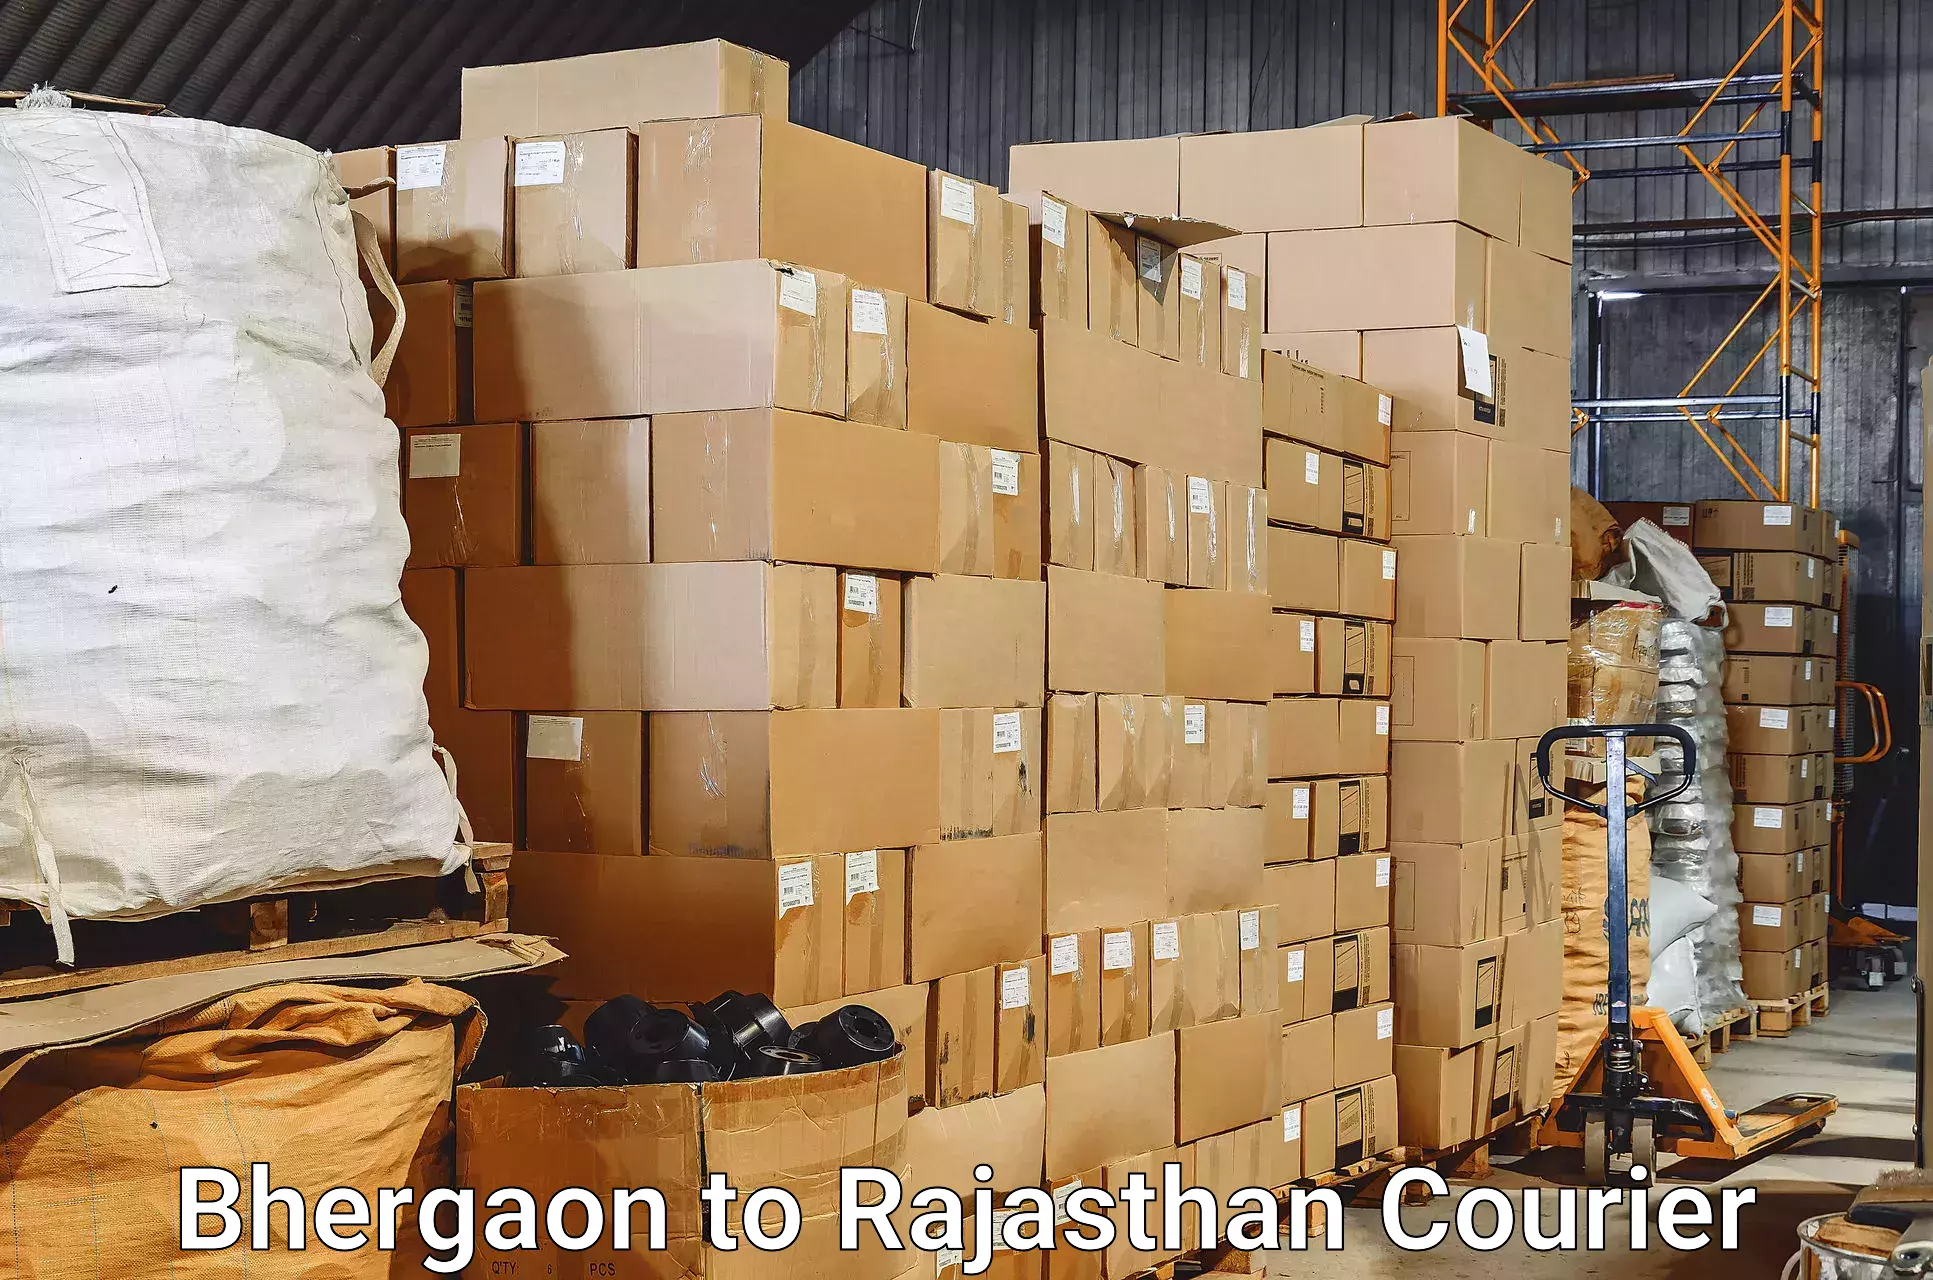 Instant baggage transport quote Bhergaon to Chhabra